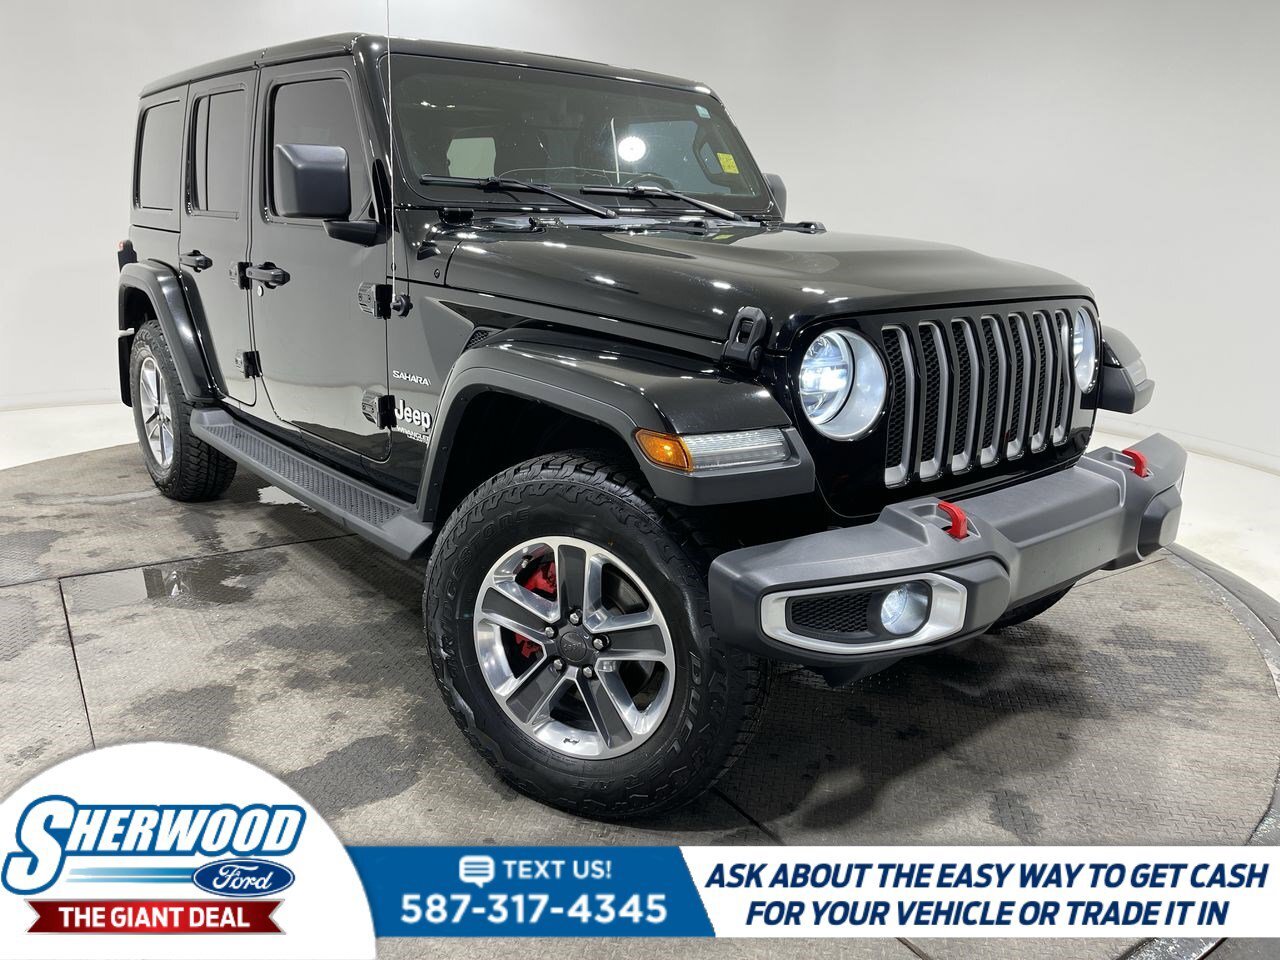 2020 Jeep WRANGLER UNLIMITED Sahara $0 Down $183 Weekly- LEATHER